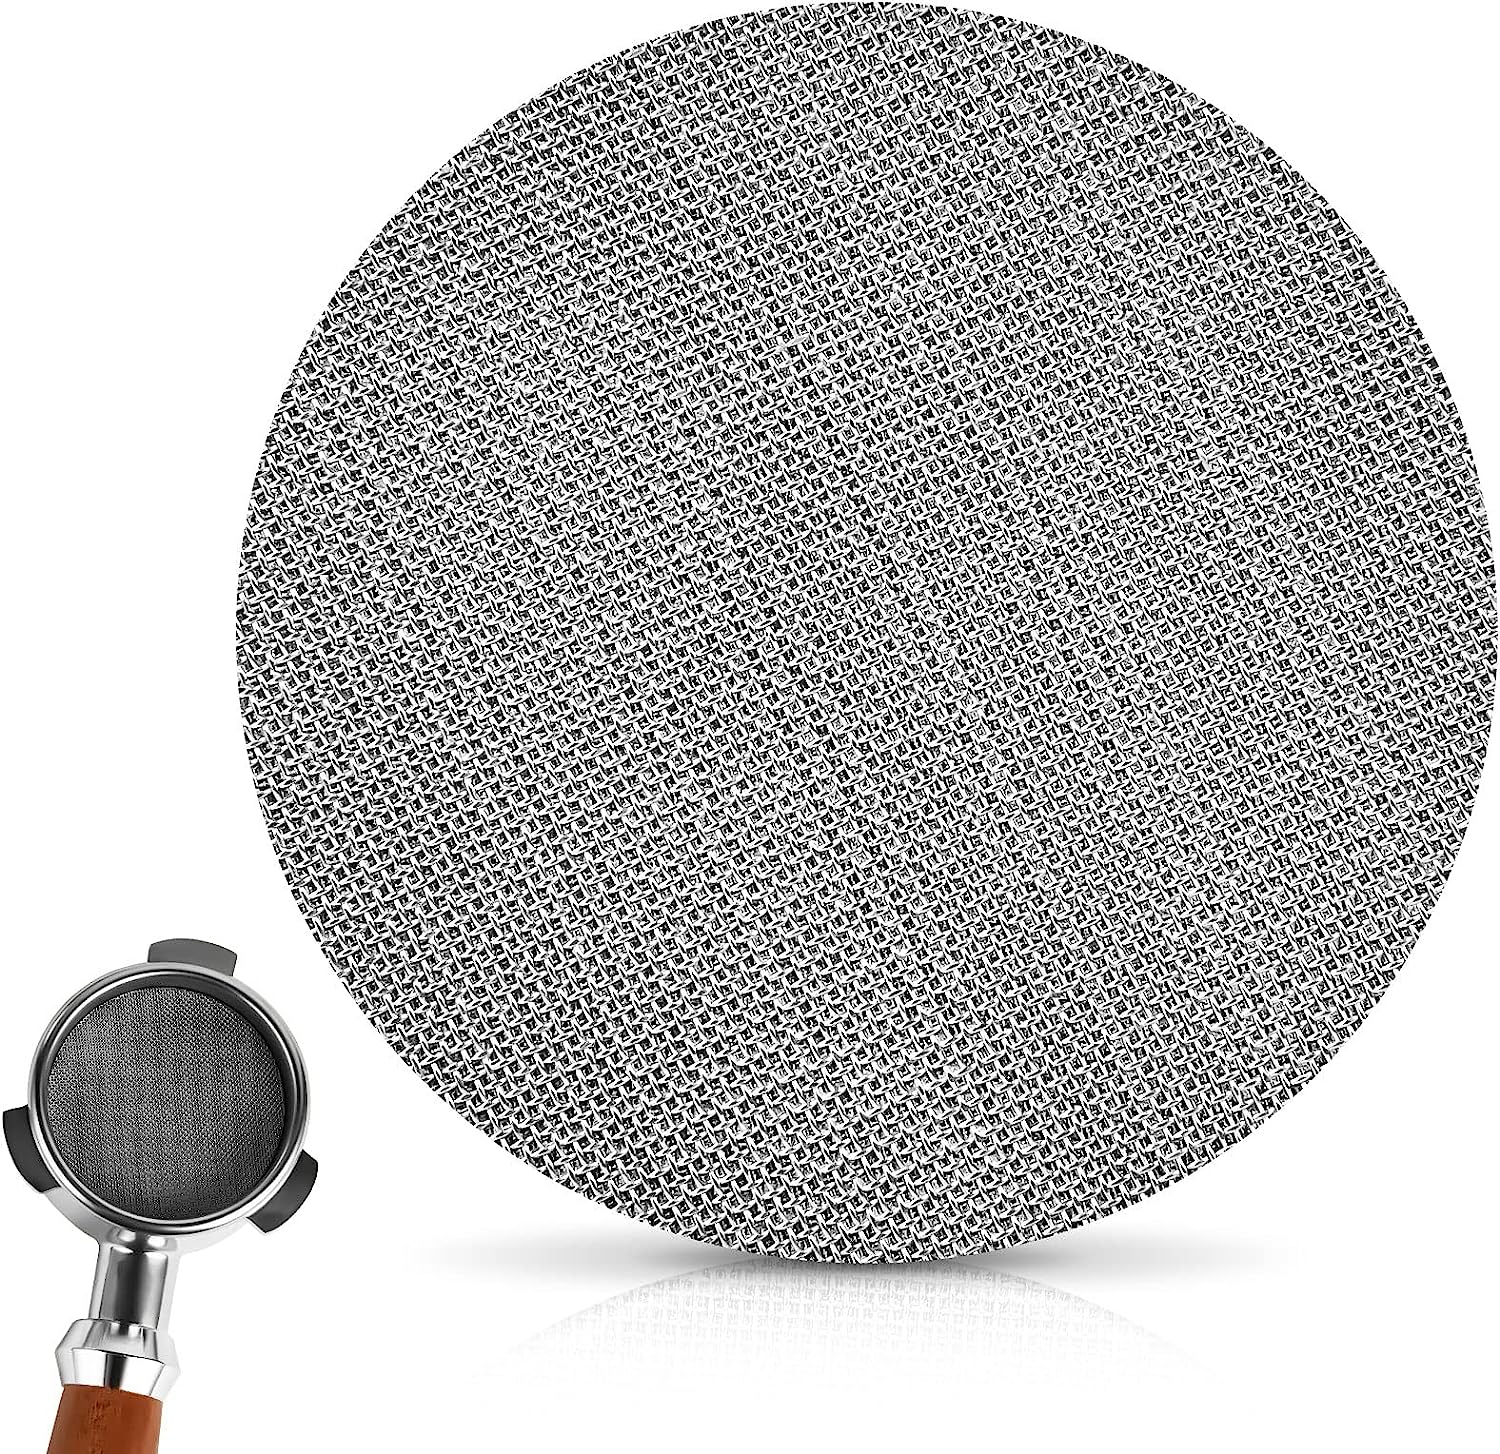 Hotut puck screen 58 mm, espresso puck strainer, coffee filter plate 1.7 mm thickness 150 μm, stainless steel 316l, reusable puck filter for espresso filter holder